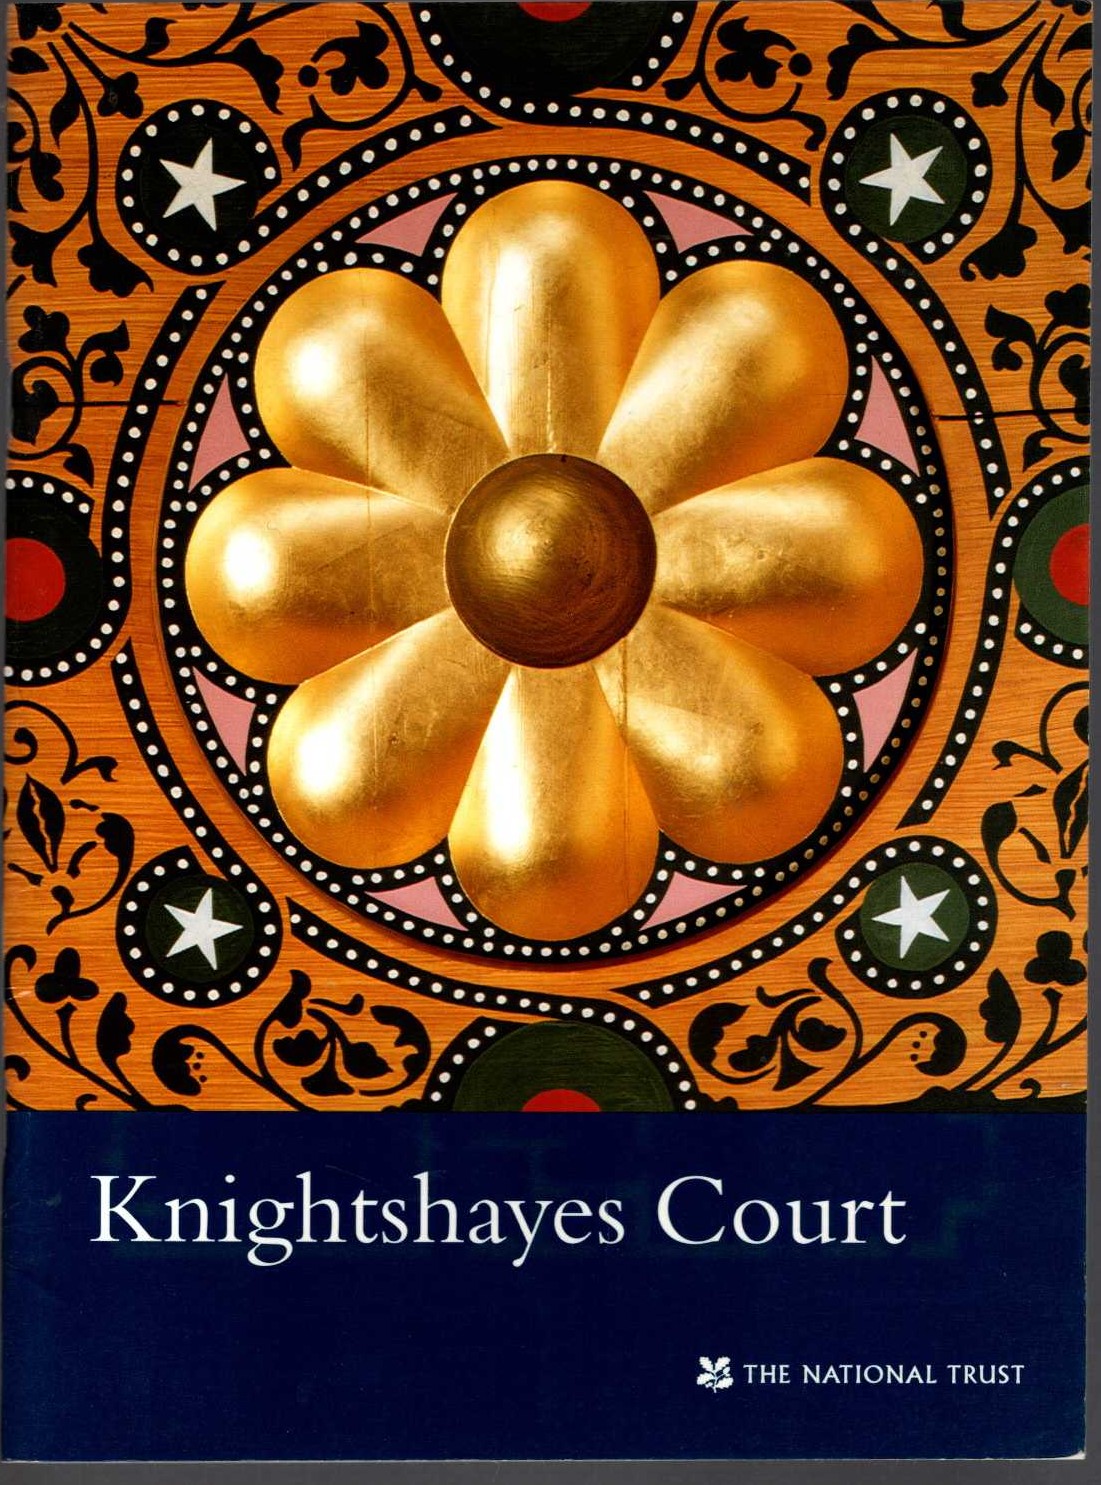 \ KNIGHTSHAYES COURT by The National Trust front book cover image